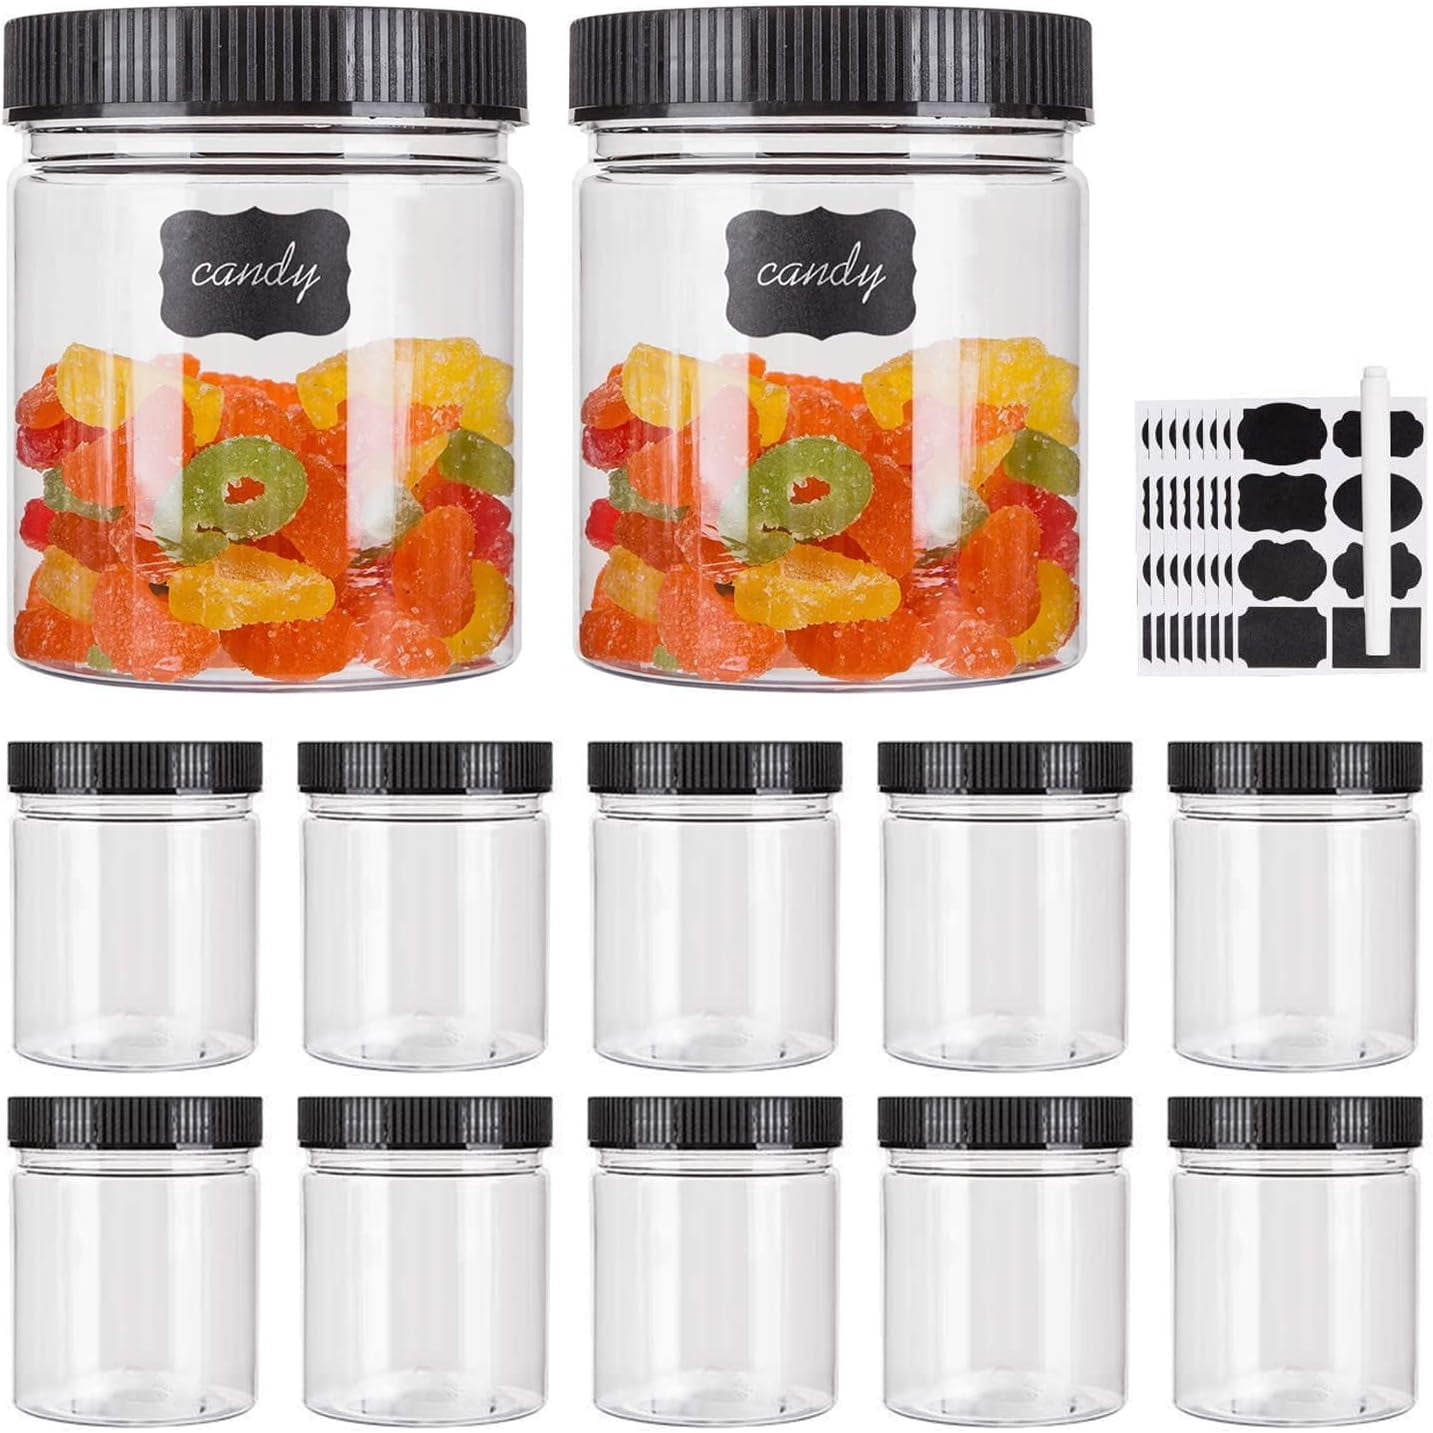 Food Jars, 16 oz Clear PET Plastic Jars w/ Red Ribbed Induction